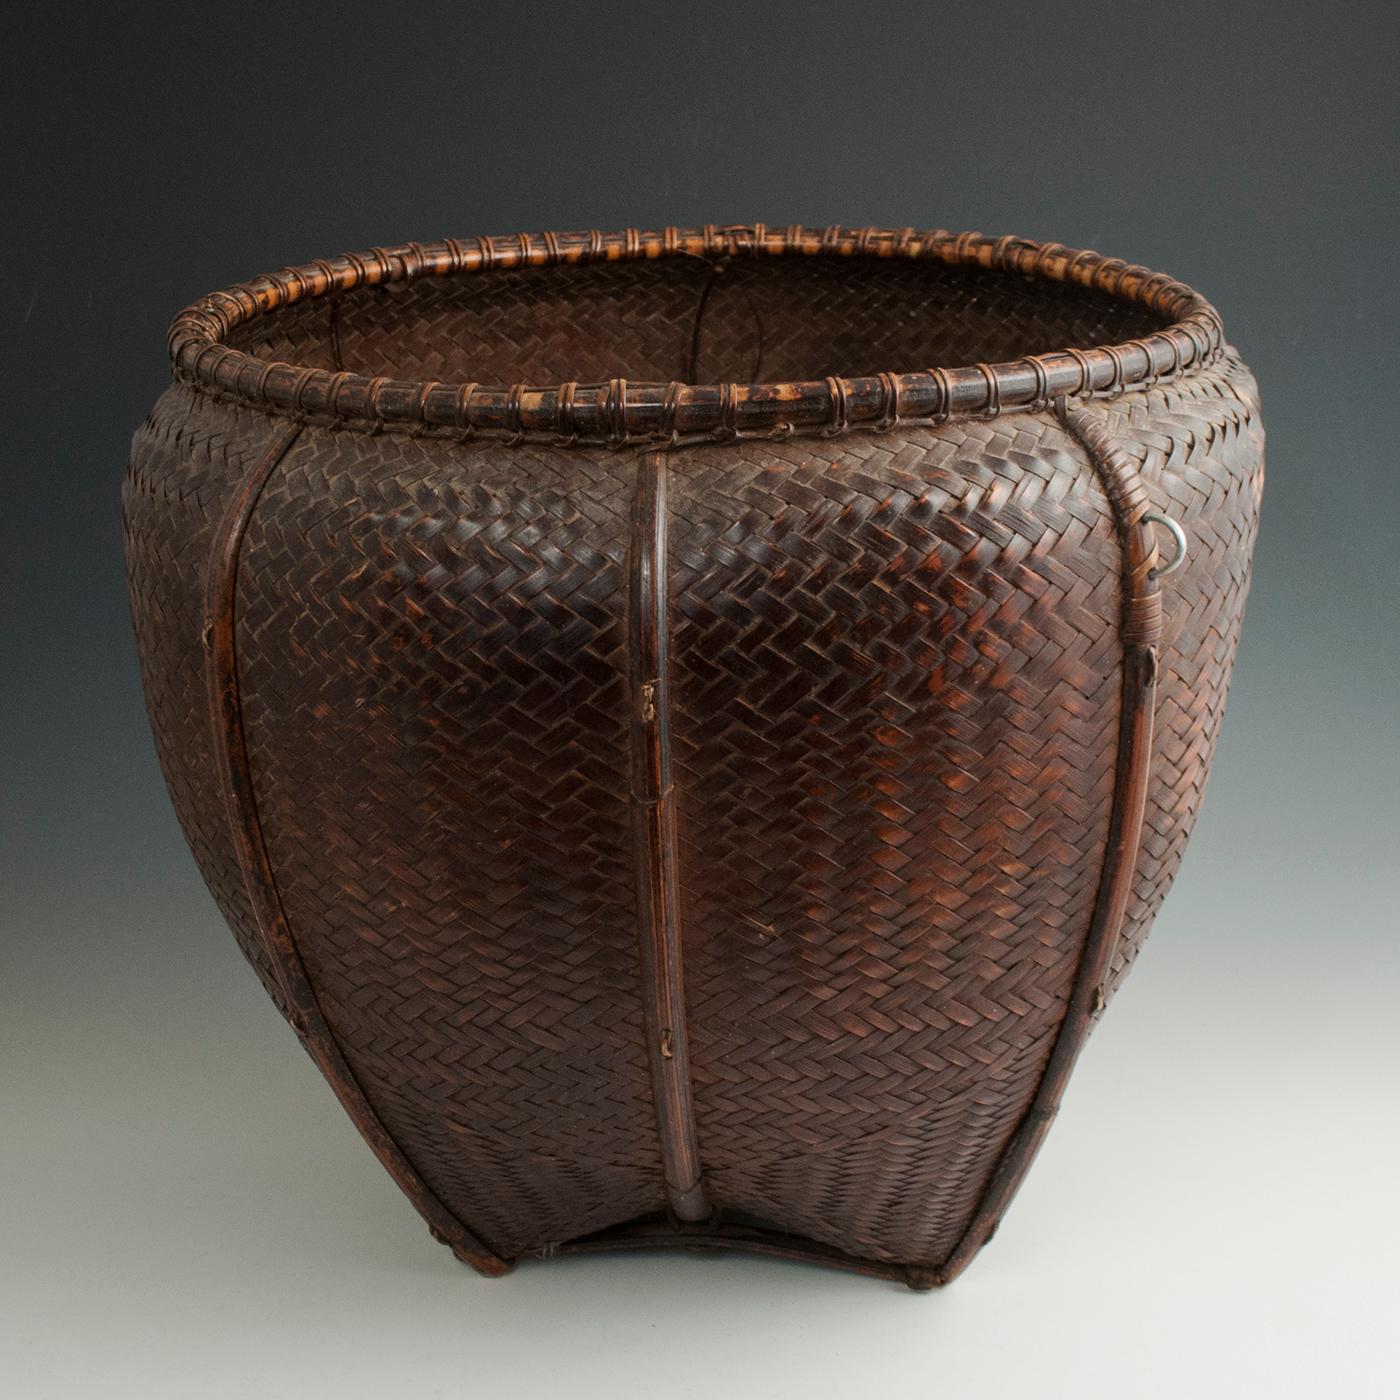 Laotian Early to Mid-20th Century Tribal Bamboo Collecting Basket, Attapeu Area, Laos